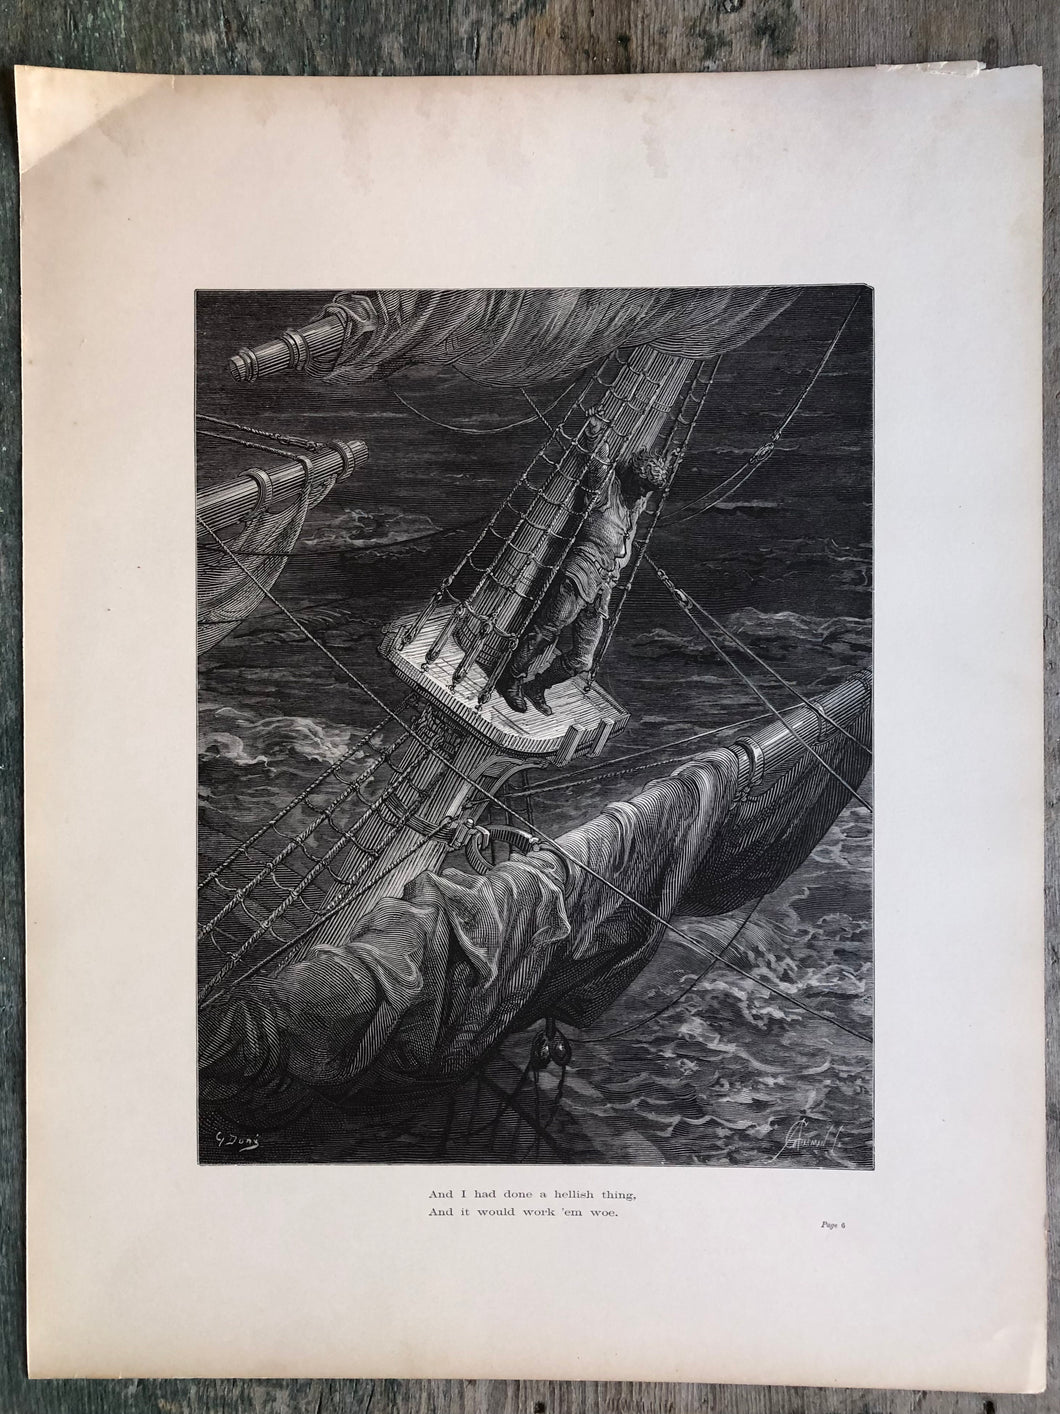 Gustave Dore Print from the Rime of the Ancient Mariner by Samuel Taylor Coleridge